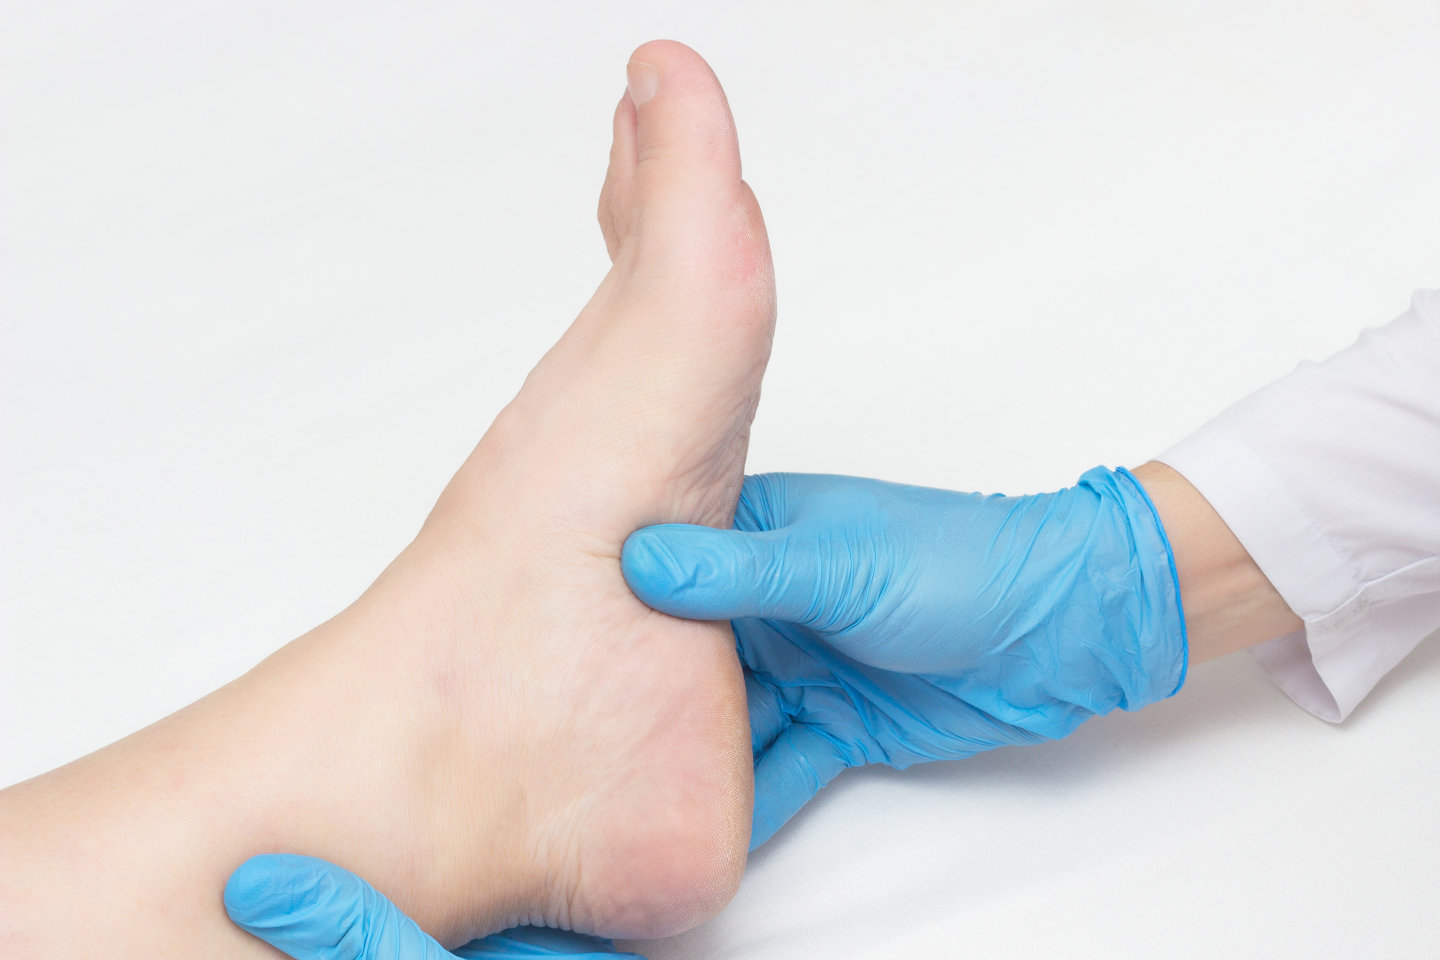 Doctor examines the patient's leg with plantar fasciitis, pain in the foot, white background, close-up, inspection